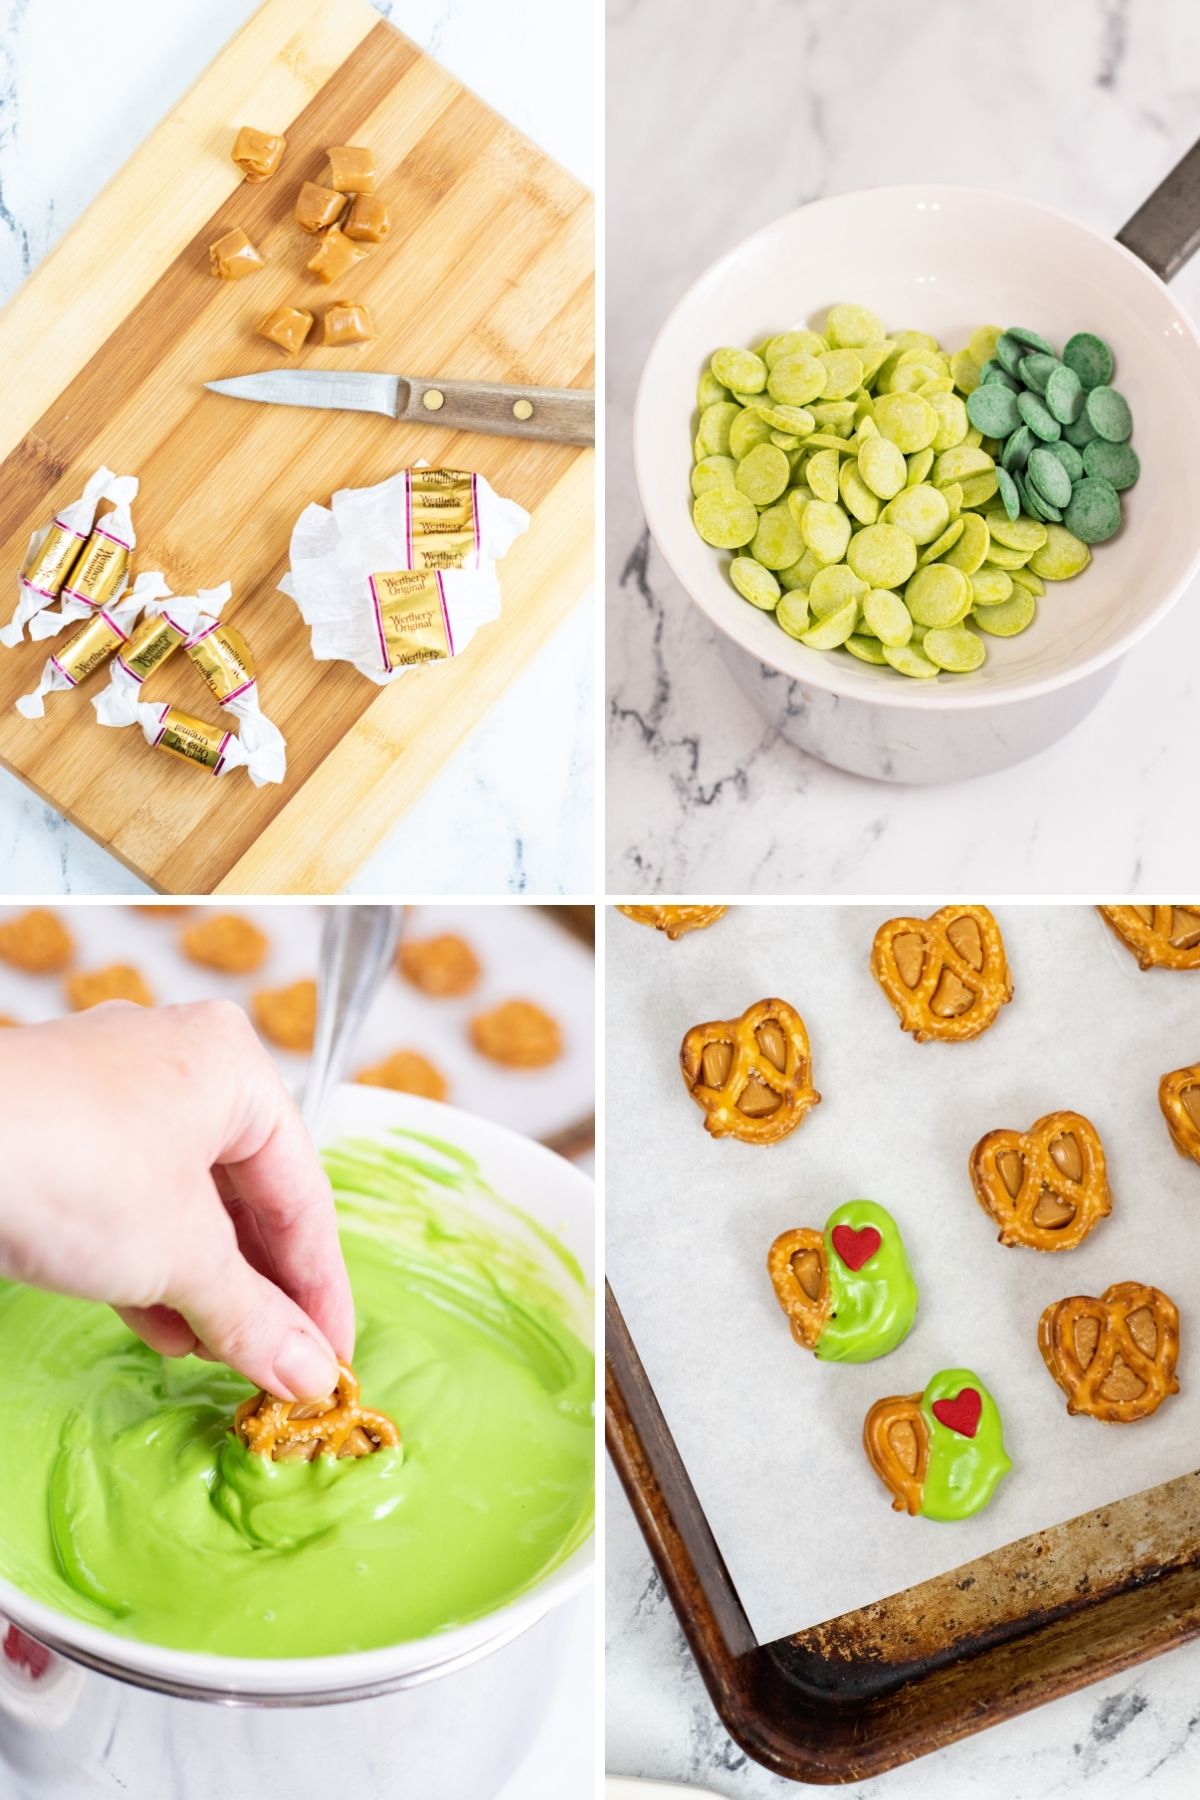 four photos: cutting board with unwrapped caramel candies; light green and dark green candy melts in bowl; melted candy melts; pretzels with caramel in them, two with dipped in green chocolate with red hearts